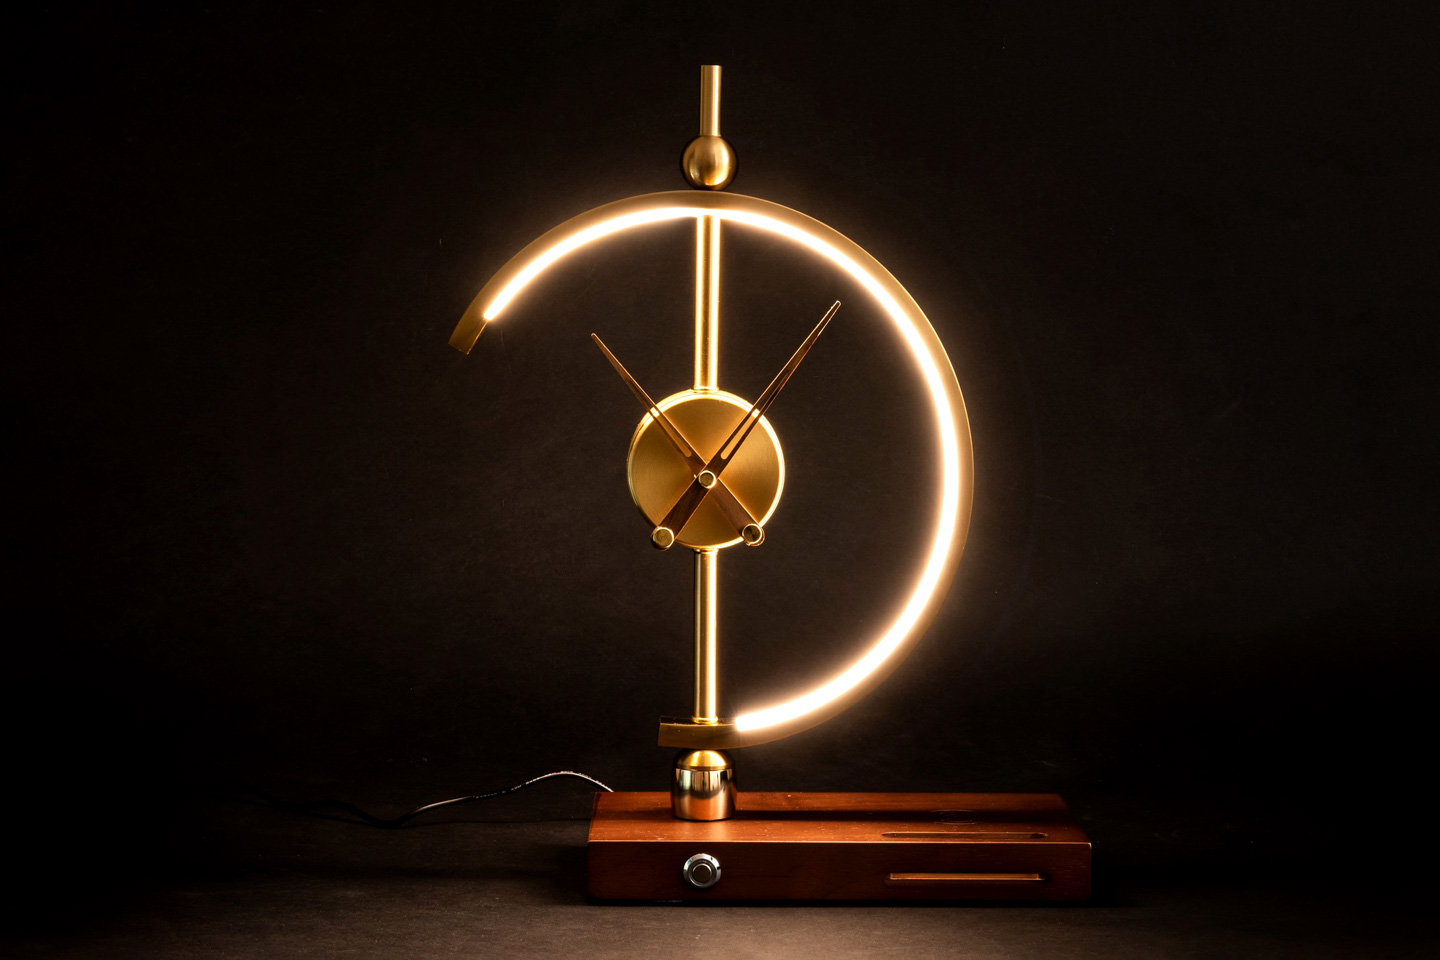 The Khonsu clock lamp is a weirdly attractive tabletop accent piece that also wirelessly charges your phone